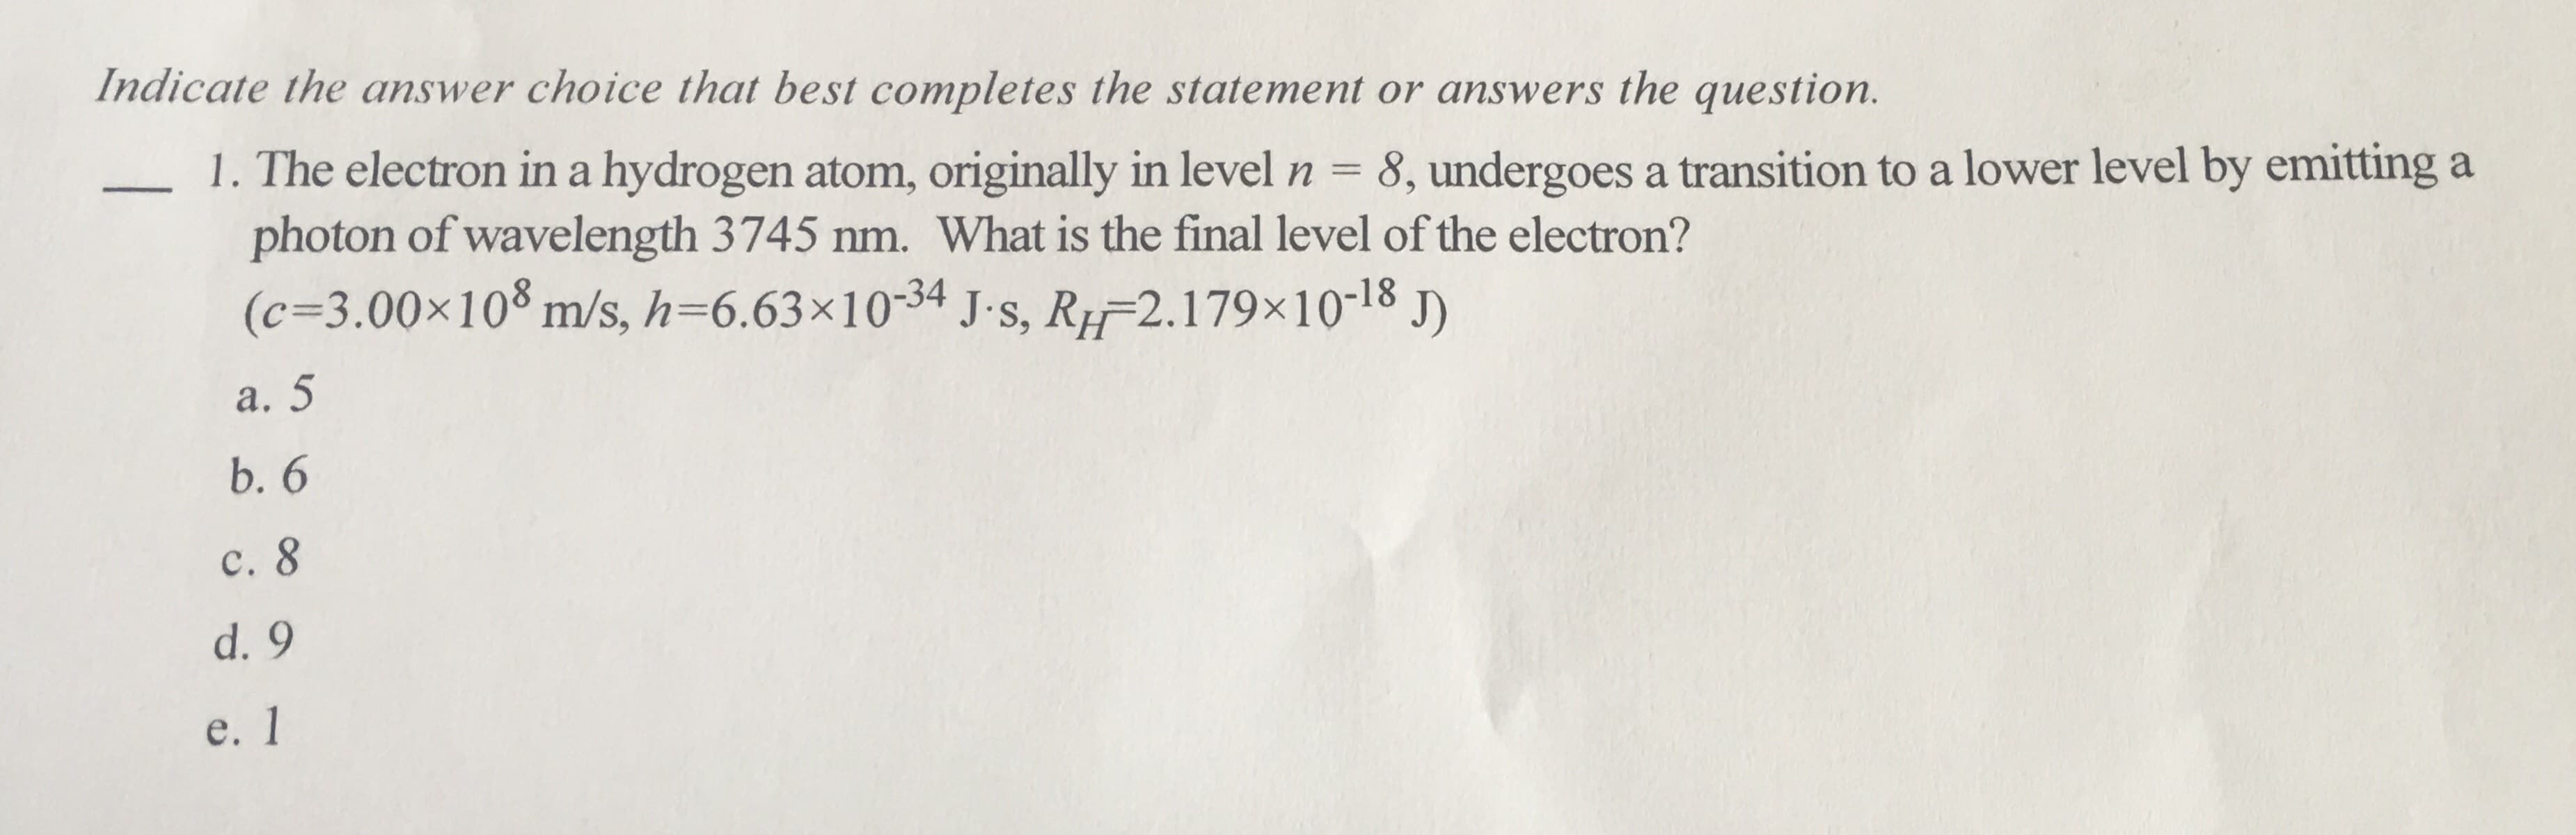 Indicate the answer choice that best comple tes the statement or answers the question.
1. The electron in a hydrogen atom, originally in level
photon of wavelength 3745 nm. What is the final level of the electron?
(c-3.00x108 m/s, h=6.63x10-34 J.s, R 2.179x10-18 J)
8, undergoes a transition to a lower level by emitting a
a. 5
b. 6
c. 8
d. 9
e. 1
